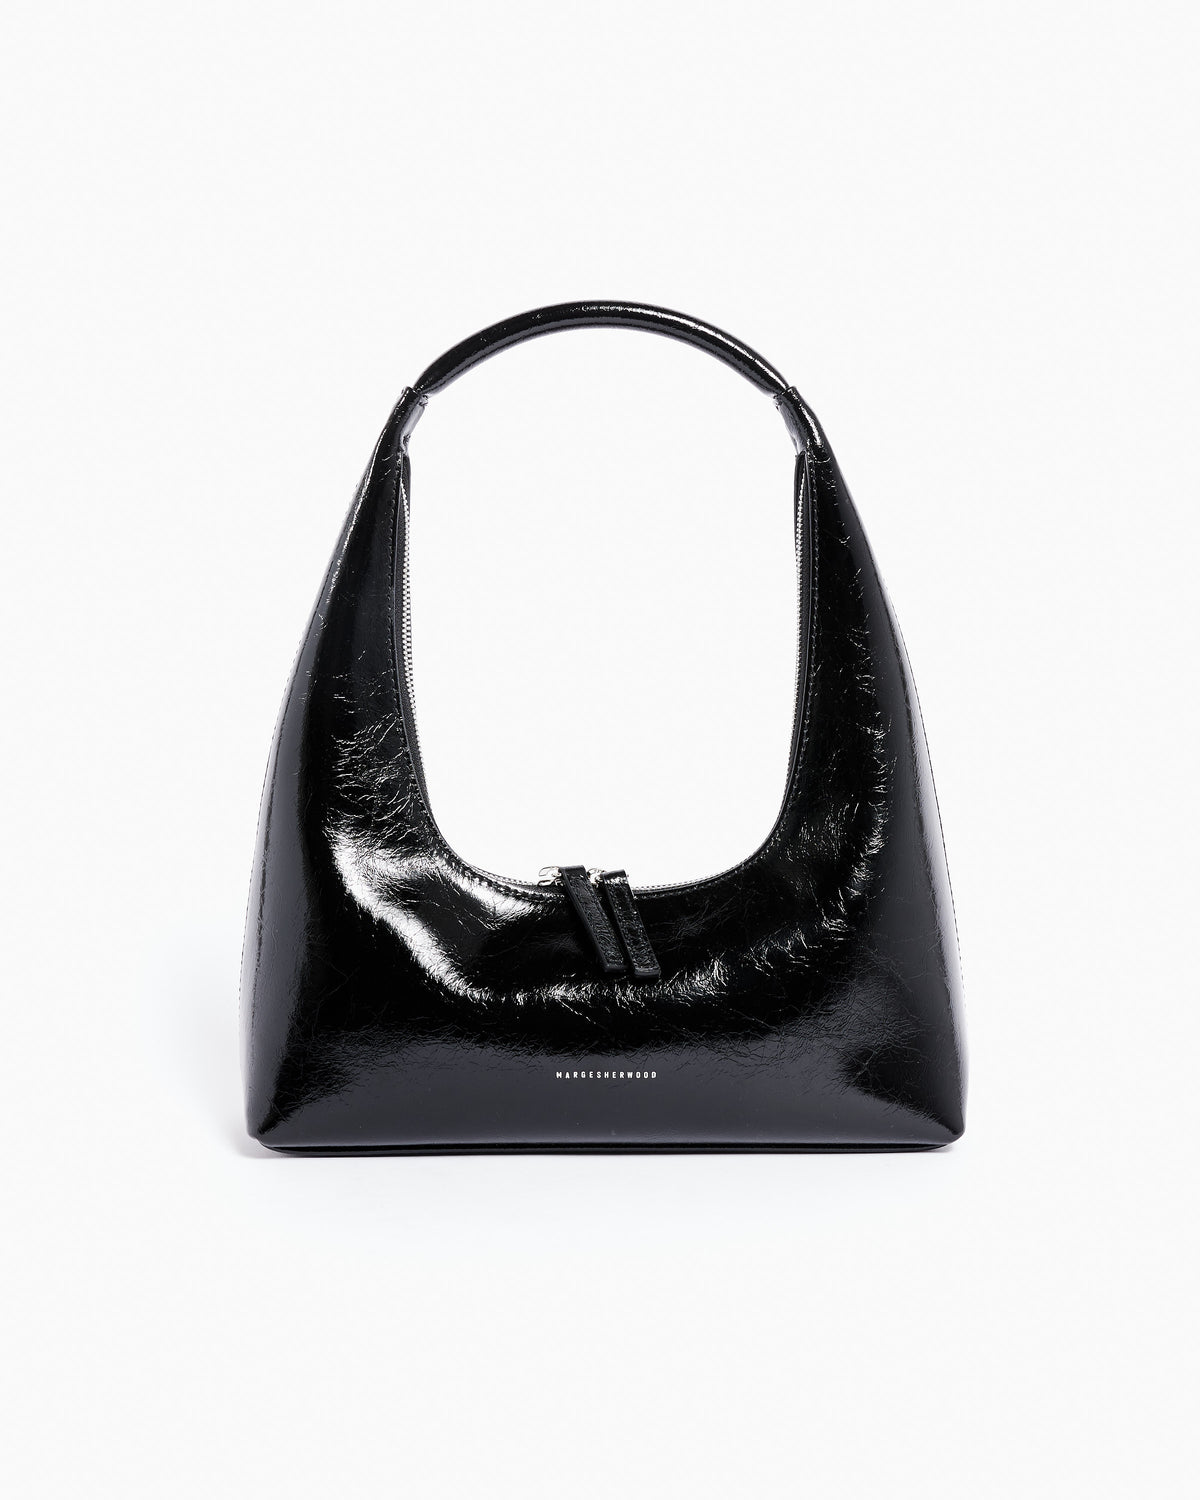 There's a wide selection of Hobo Shoulder Bag - Black Crinkle